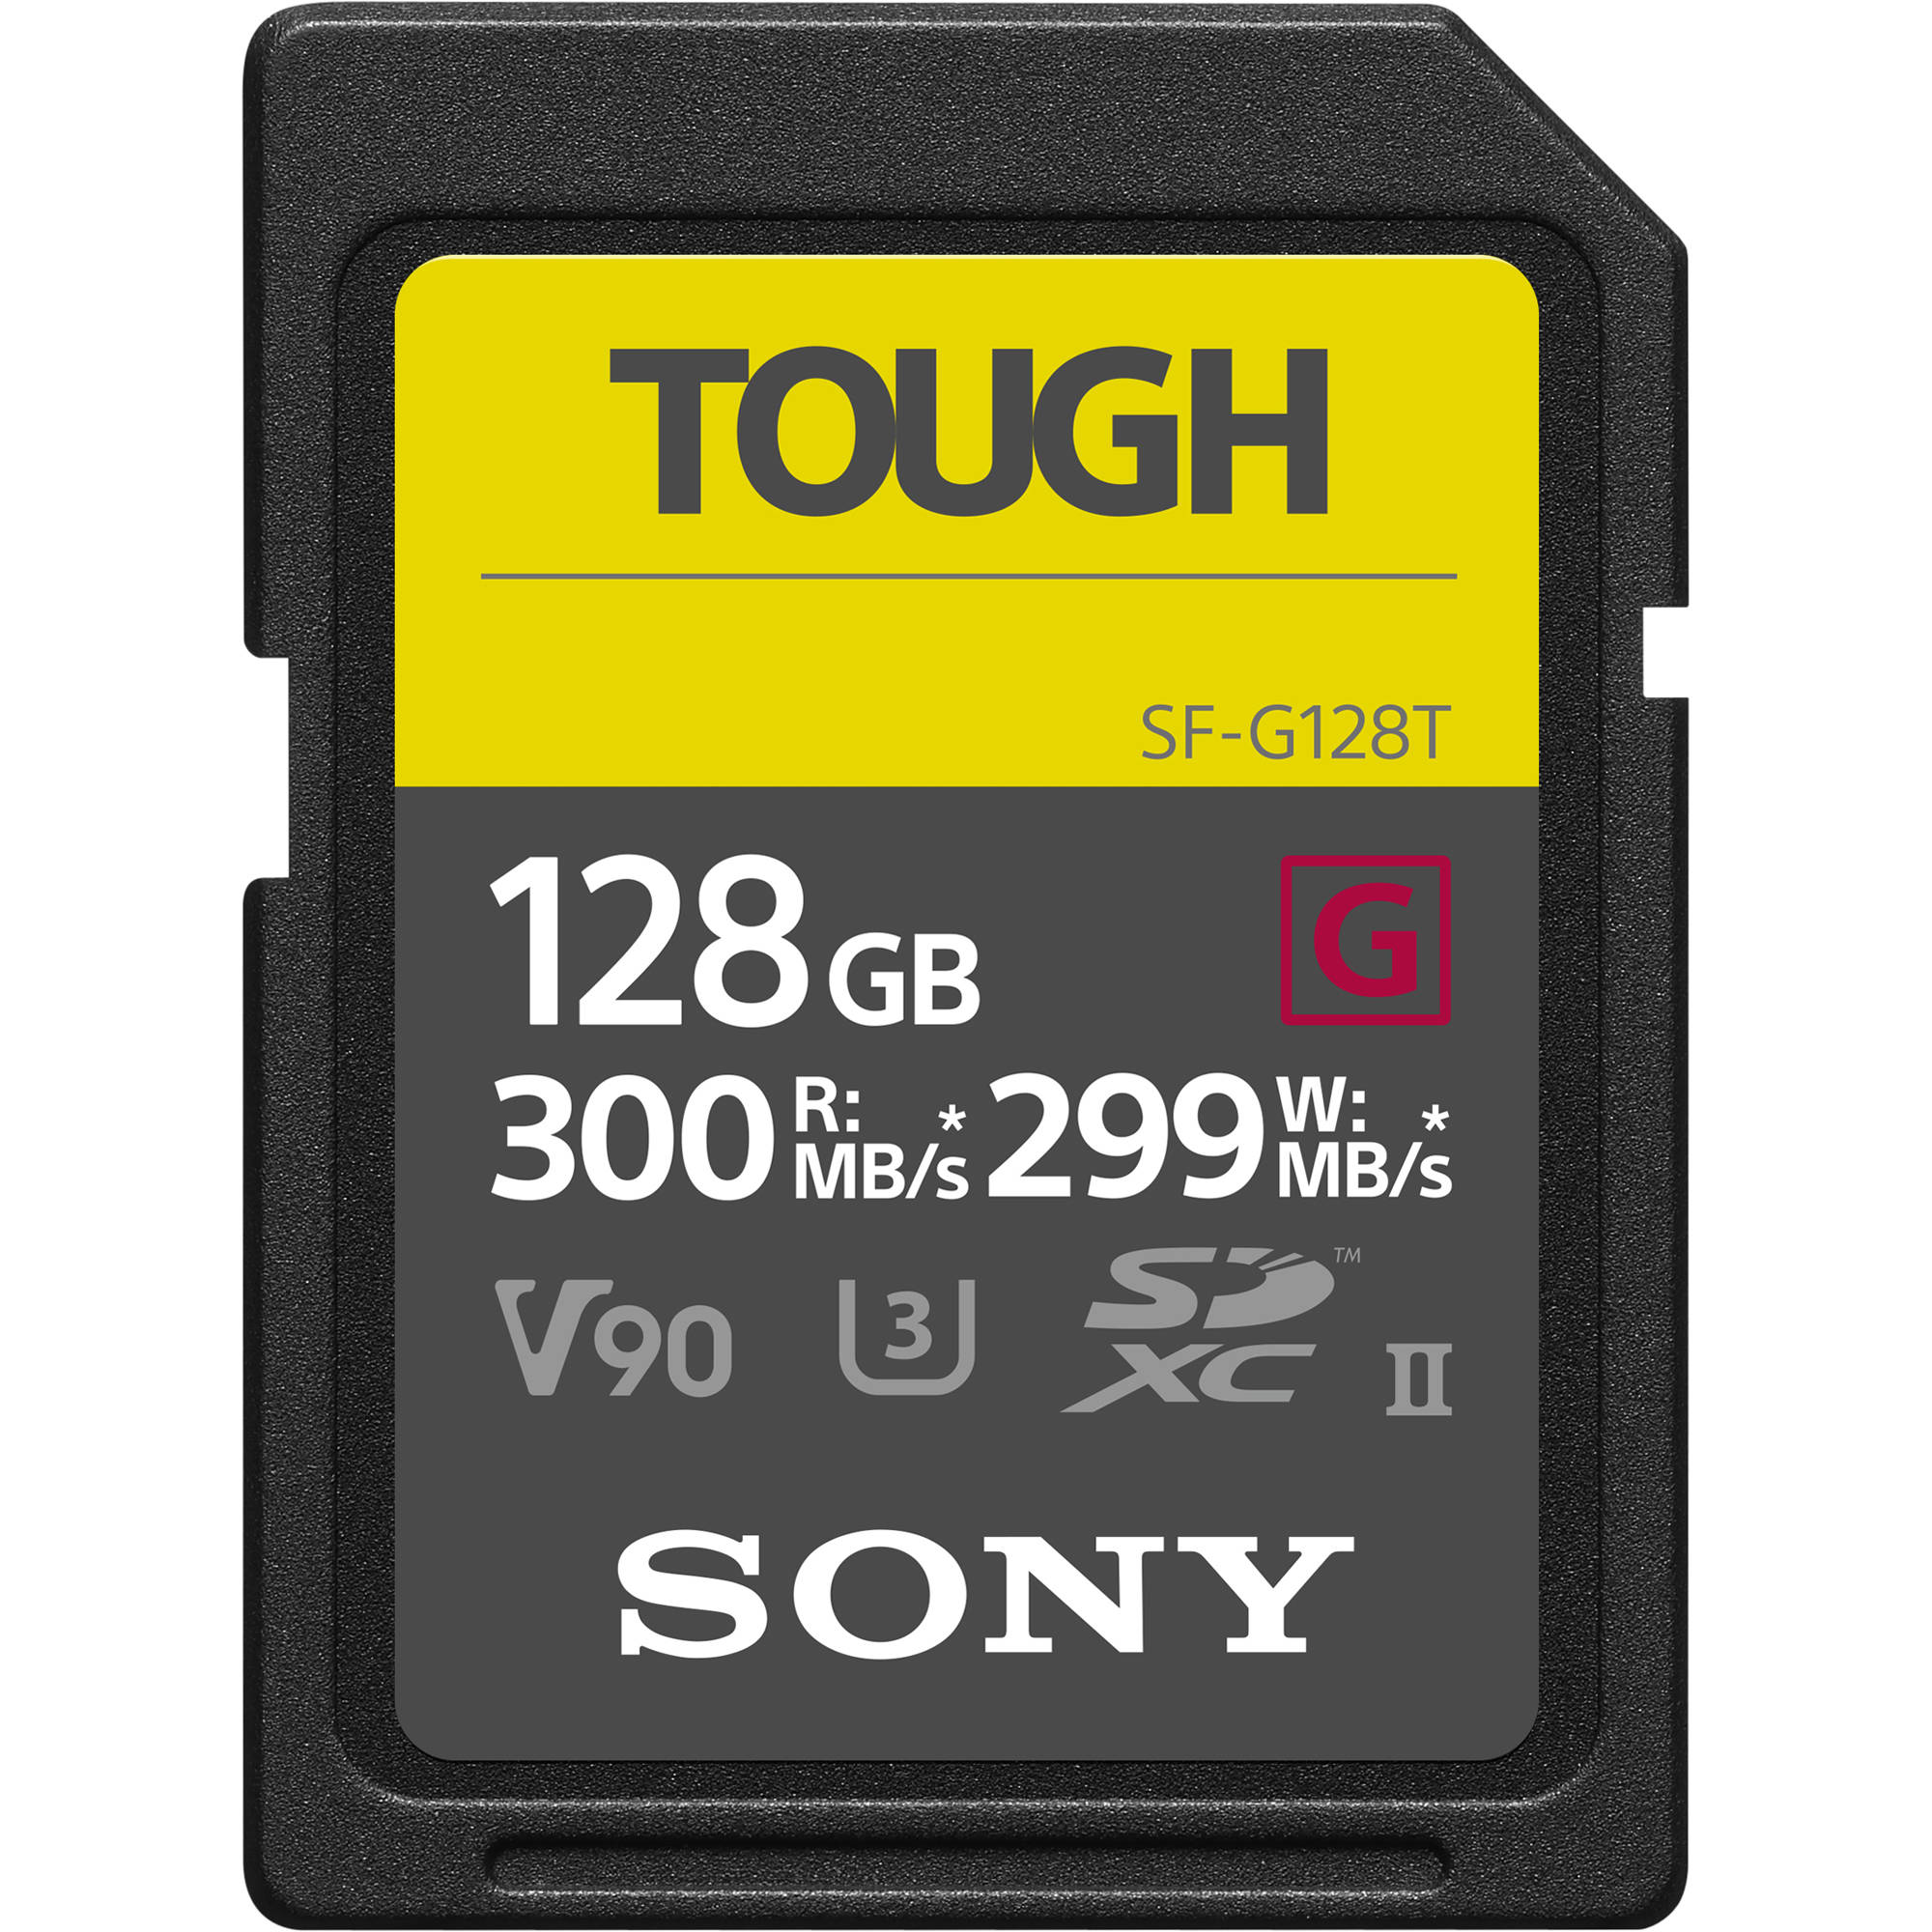 TThumbnail image for Sony 128GB SF-G Tough Series UHS-II SDXC Memory Card